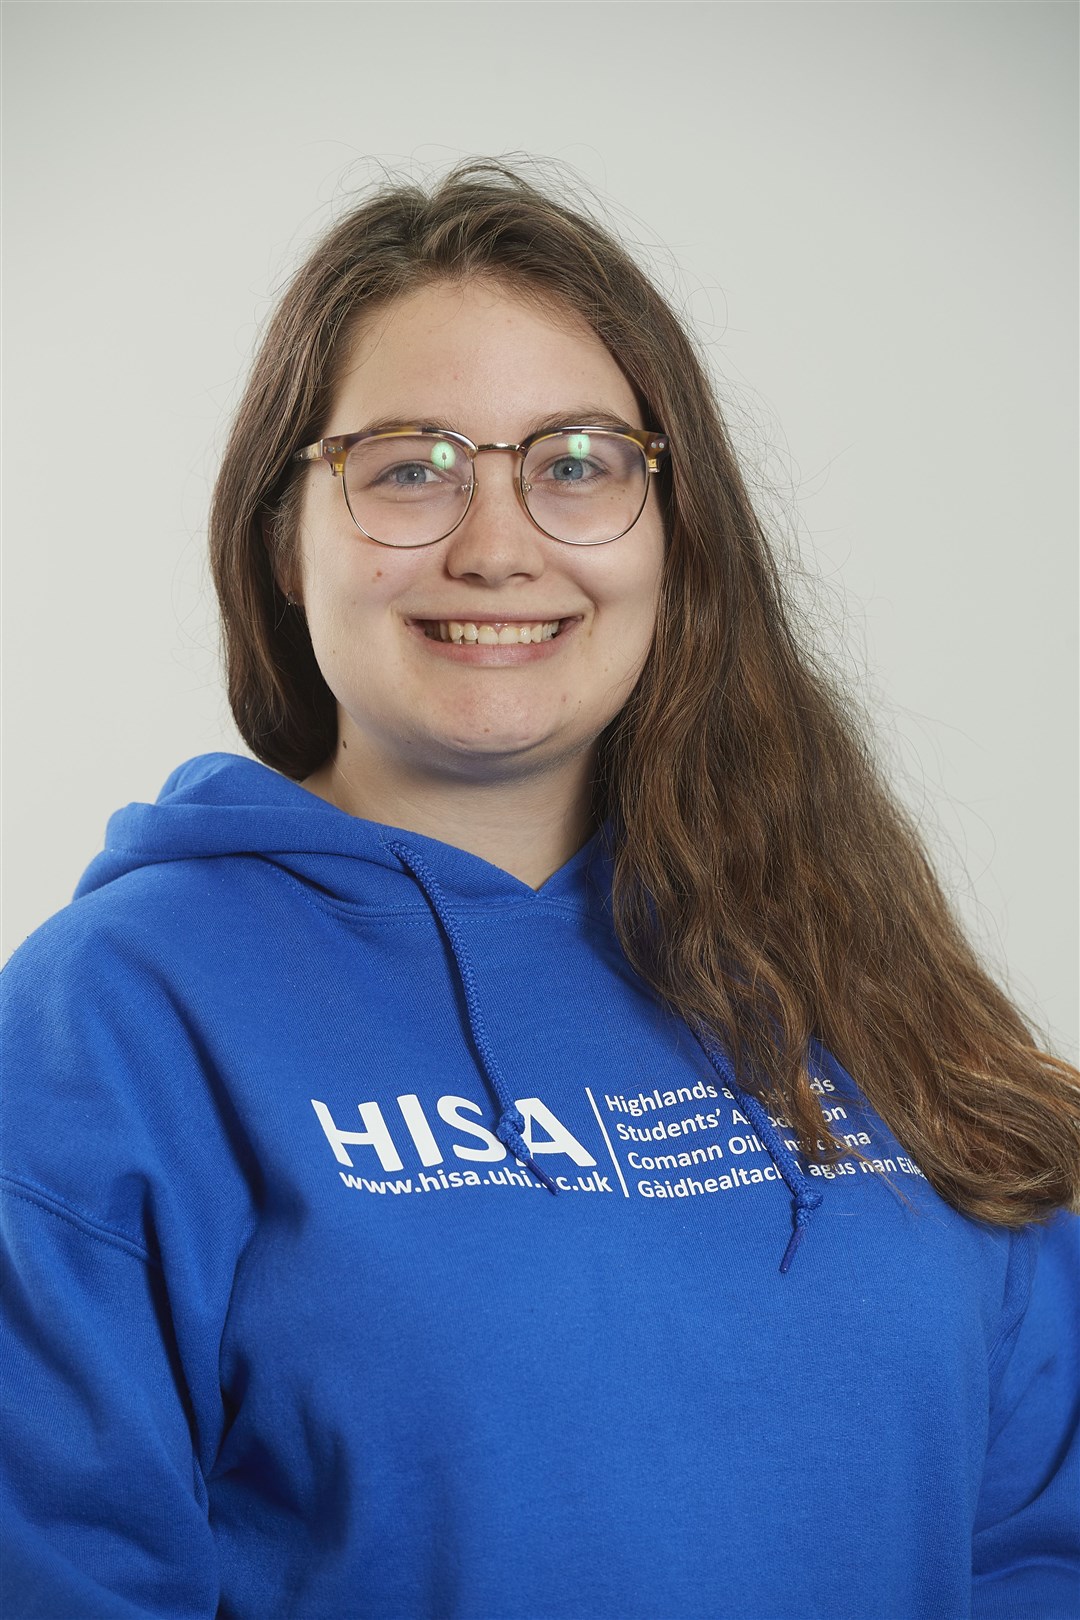 Highlands and Islands Students' Association president Florence Jansen will take part in the first seminar in the series.